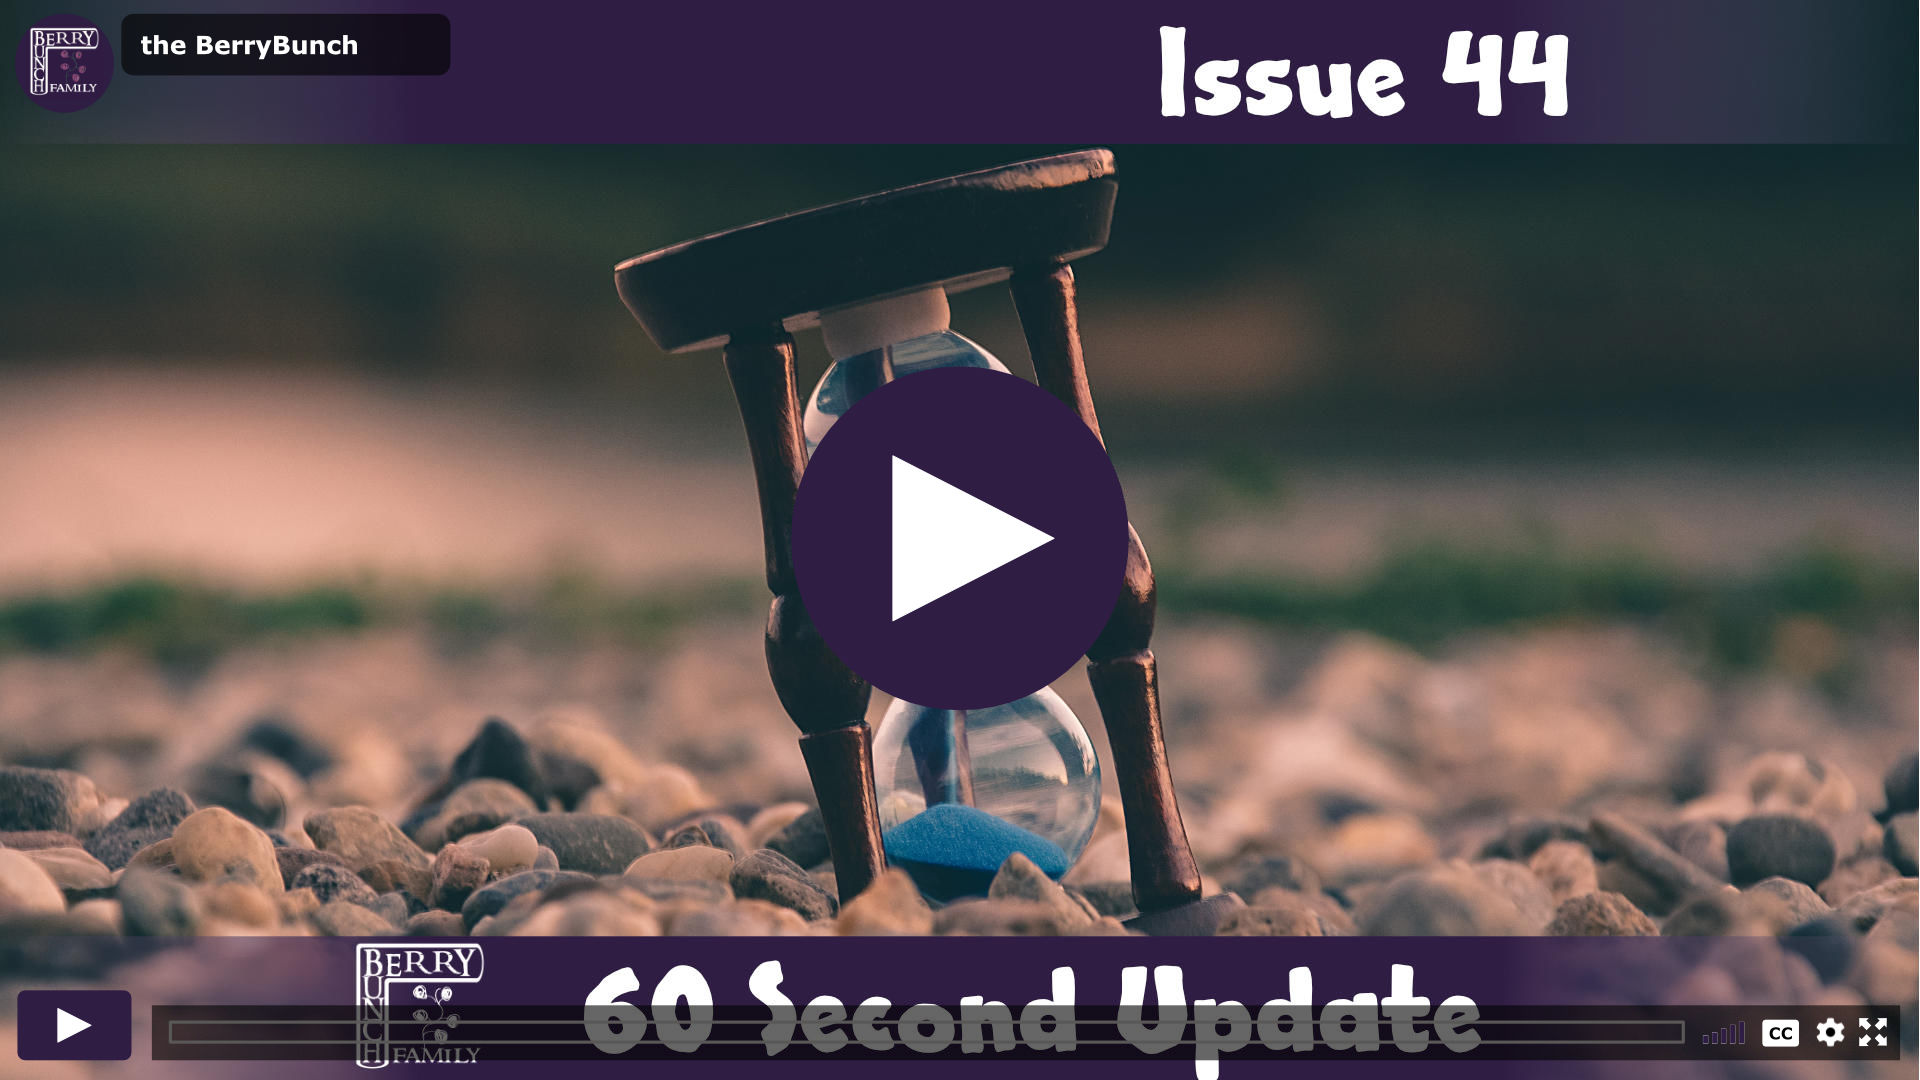 60 Second Update, Issue 44 WP